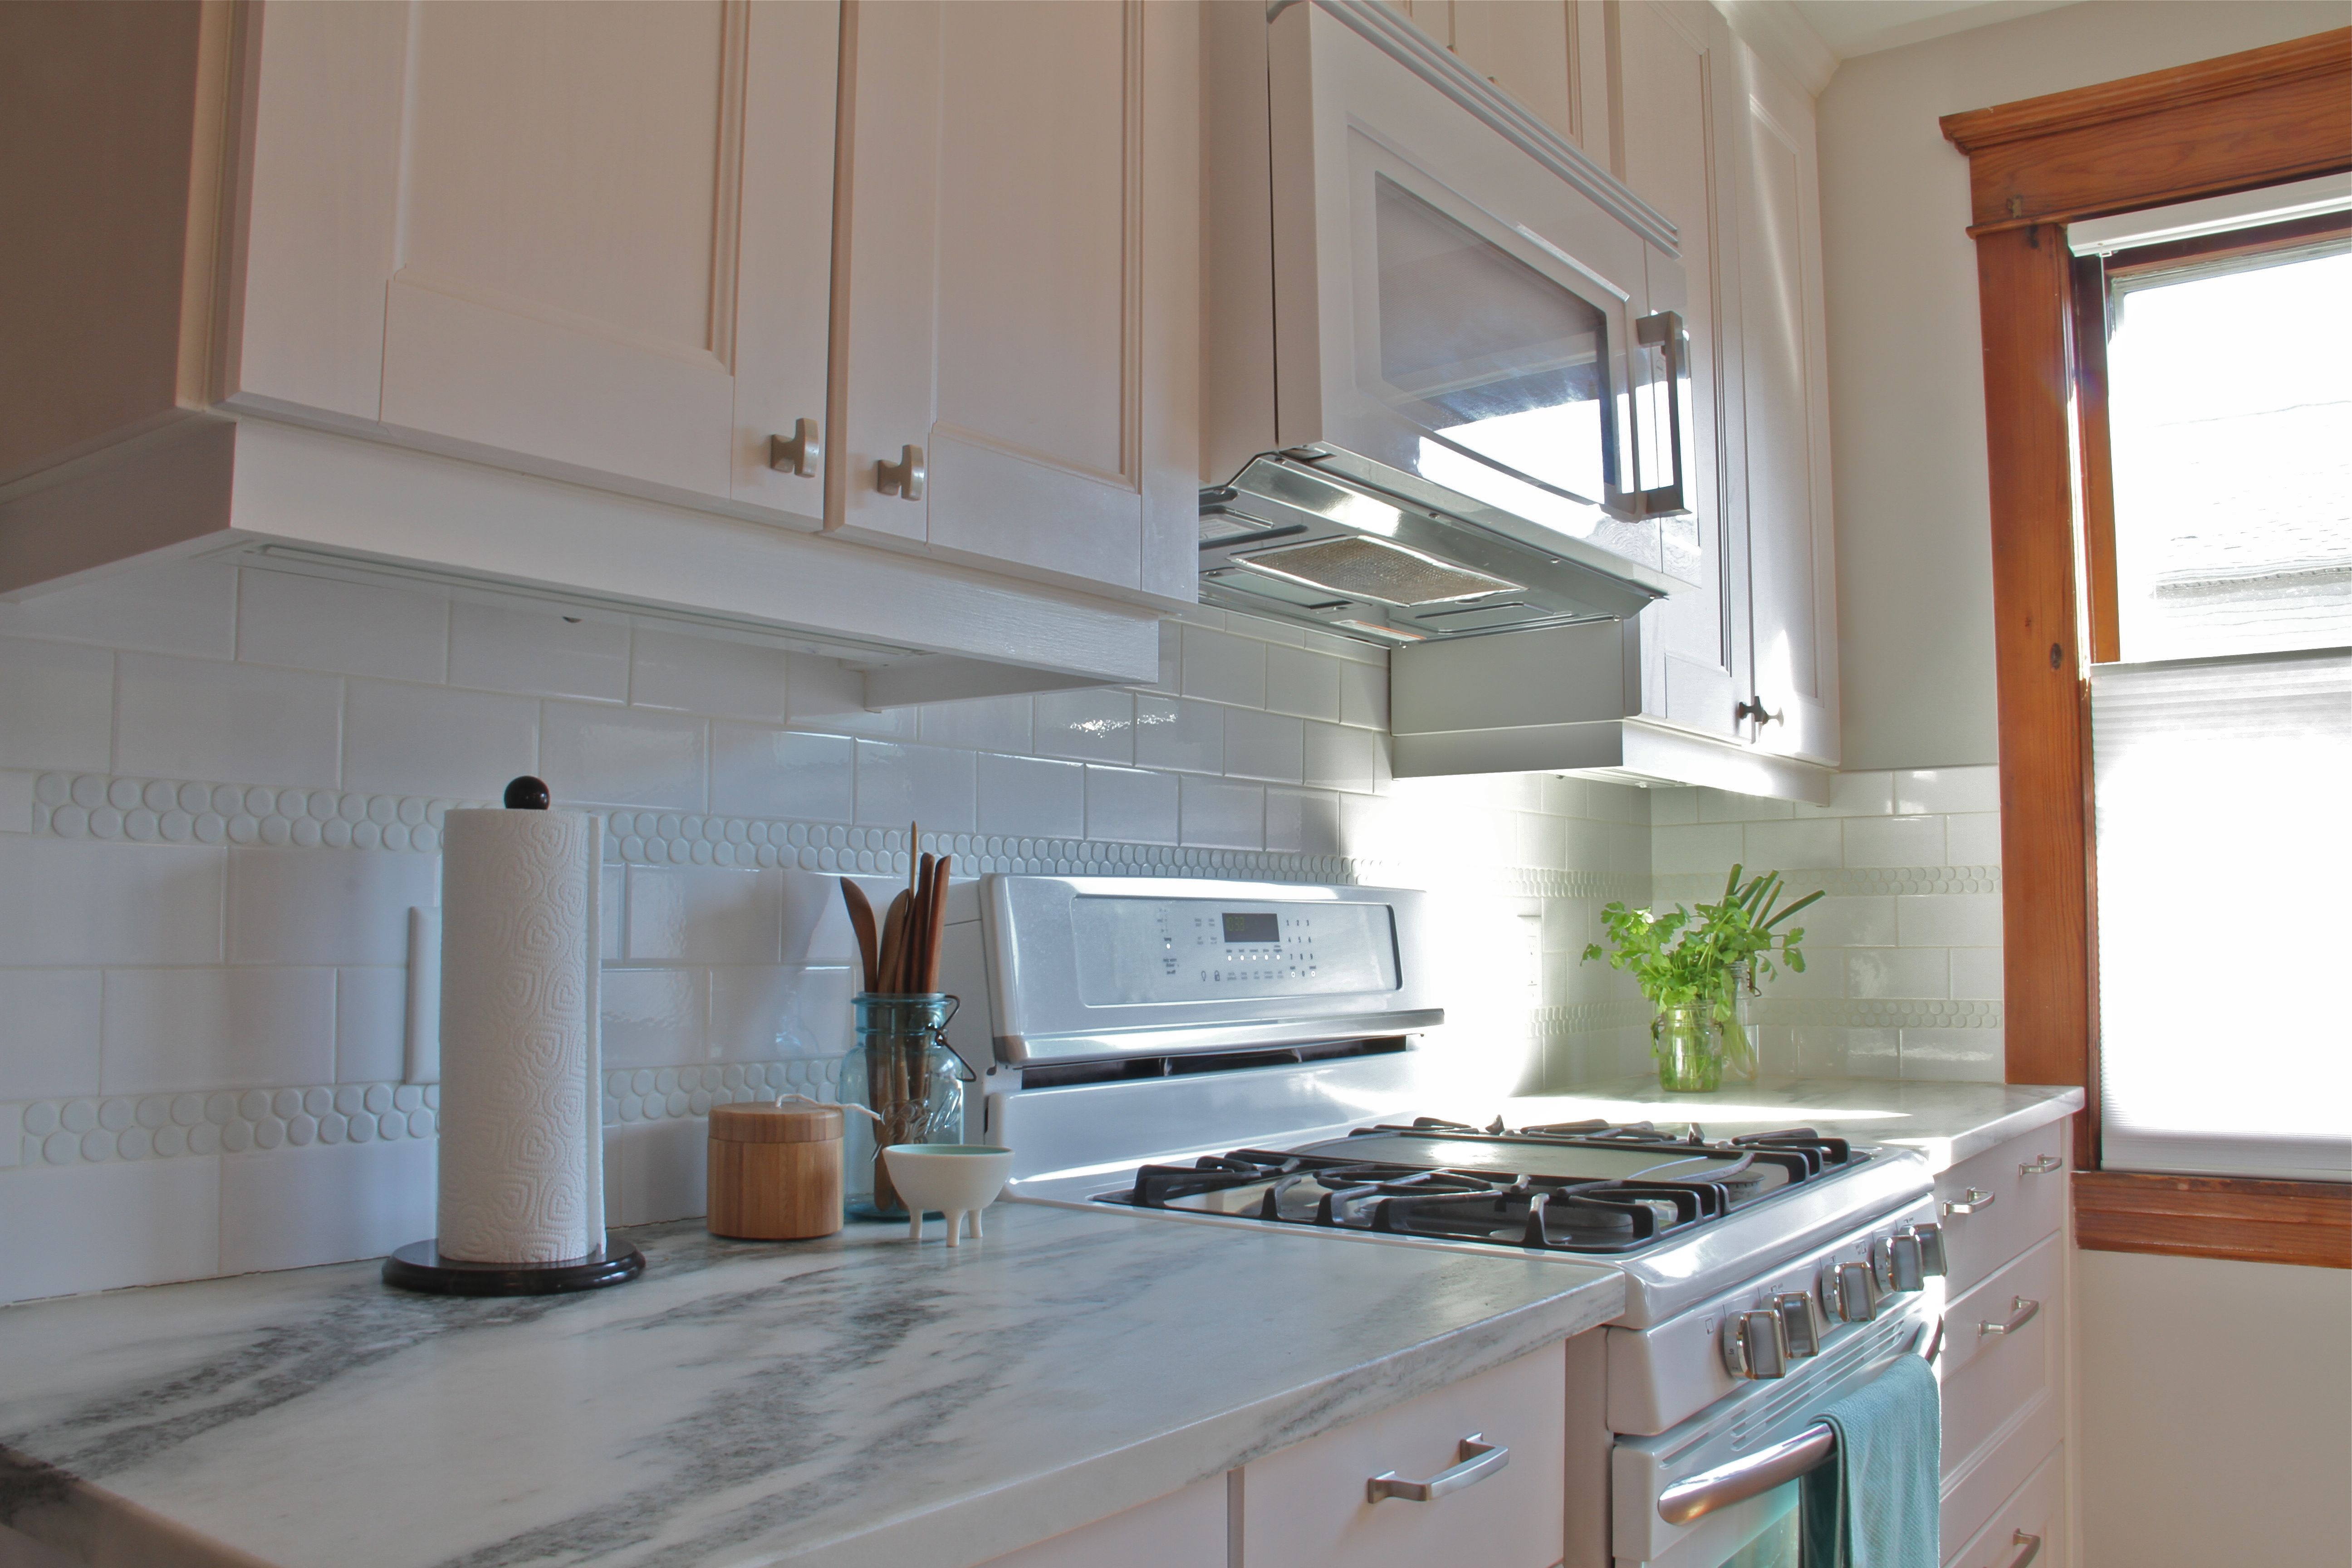 AFTER: Now the light floods the space, and the prep areas are nearly 3' wide. Plus, the built-in microwave hood is an efficient solution for small kitchens.